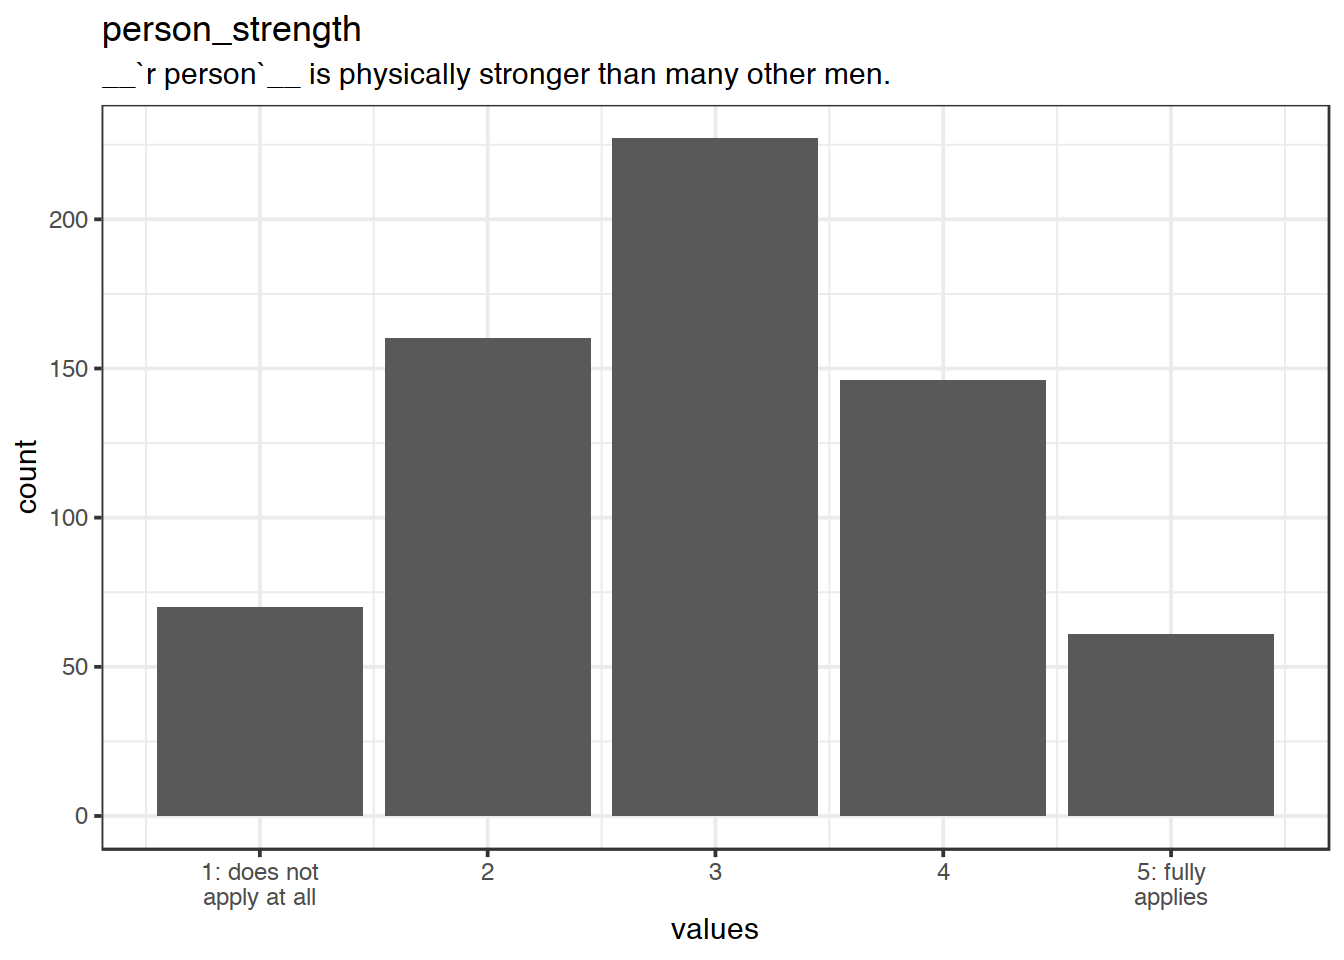 Distribution of values for person_strength